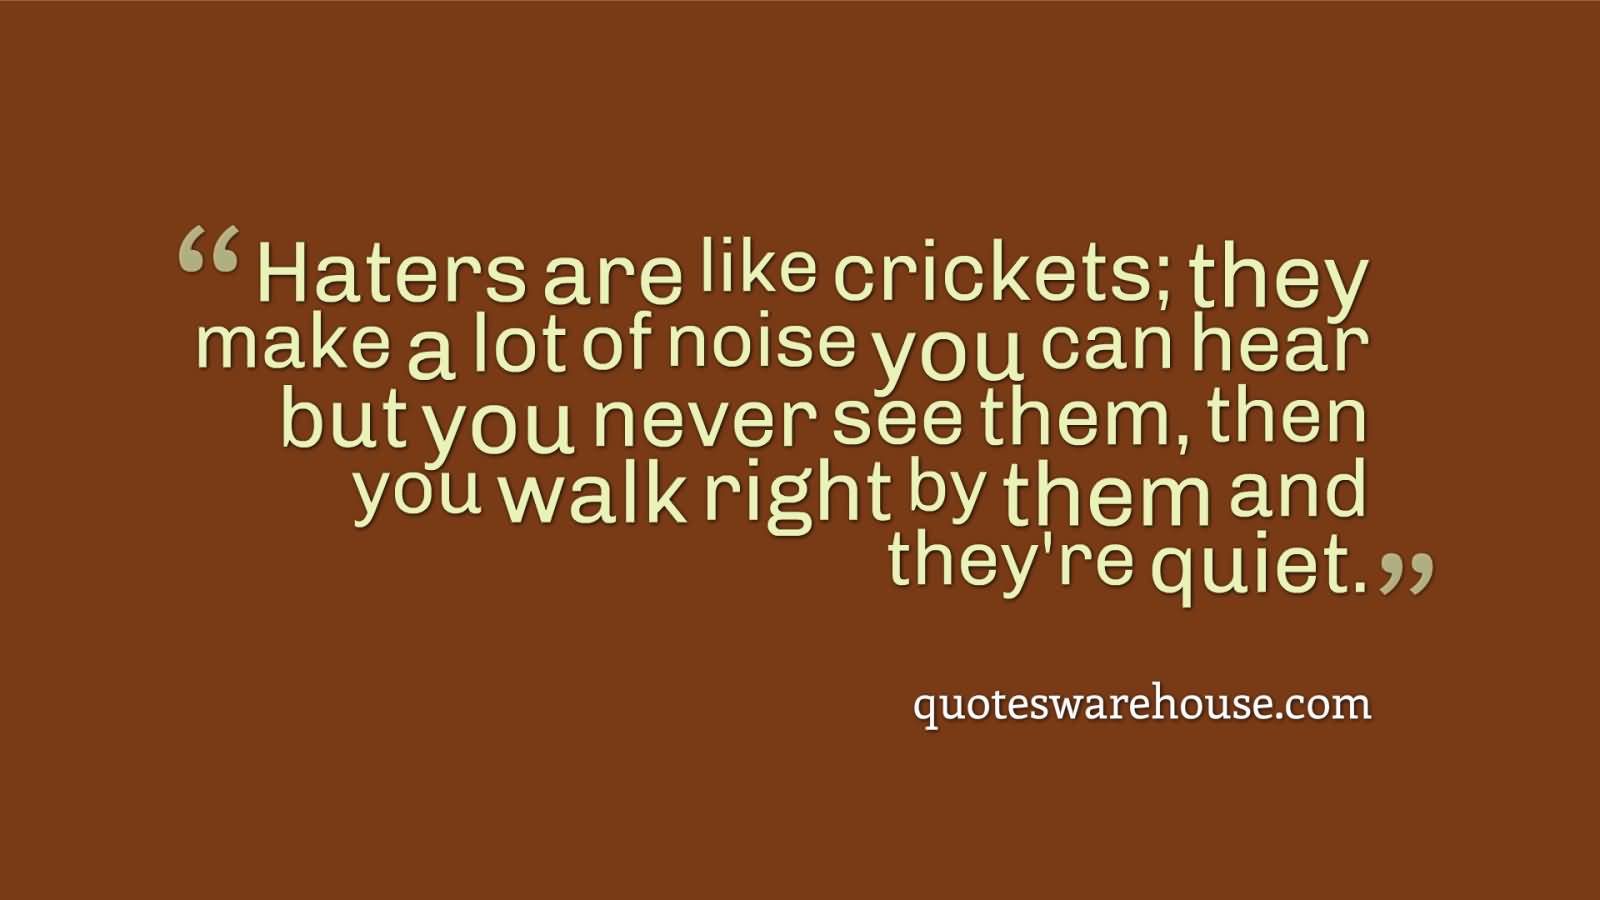 Haters are like crickets. Crickets make a lot of noise, you hear it but you can’t see them. Then right when you walk by them, they’re quiet.